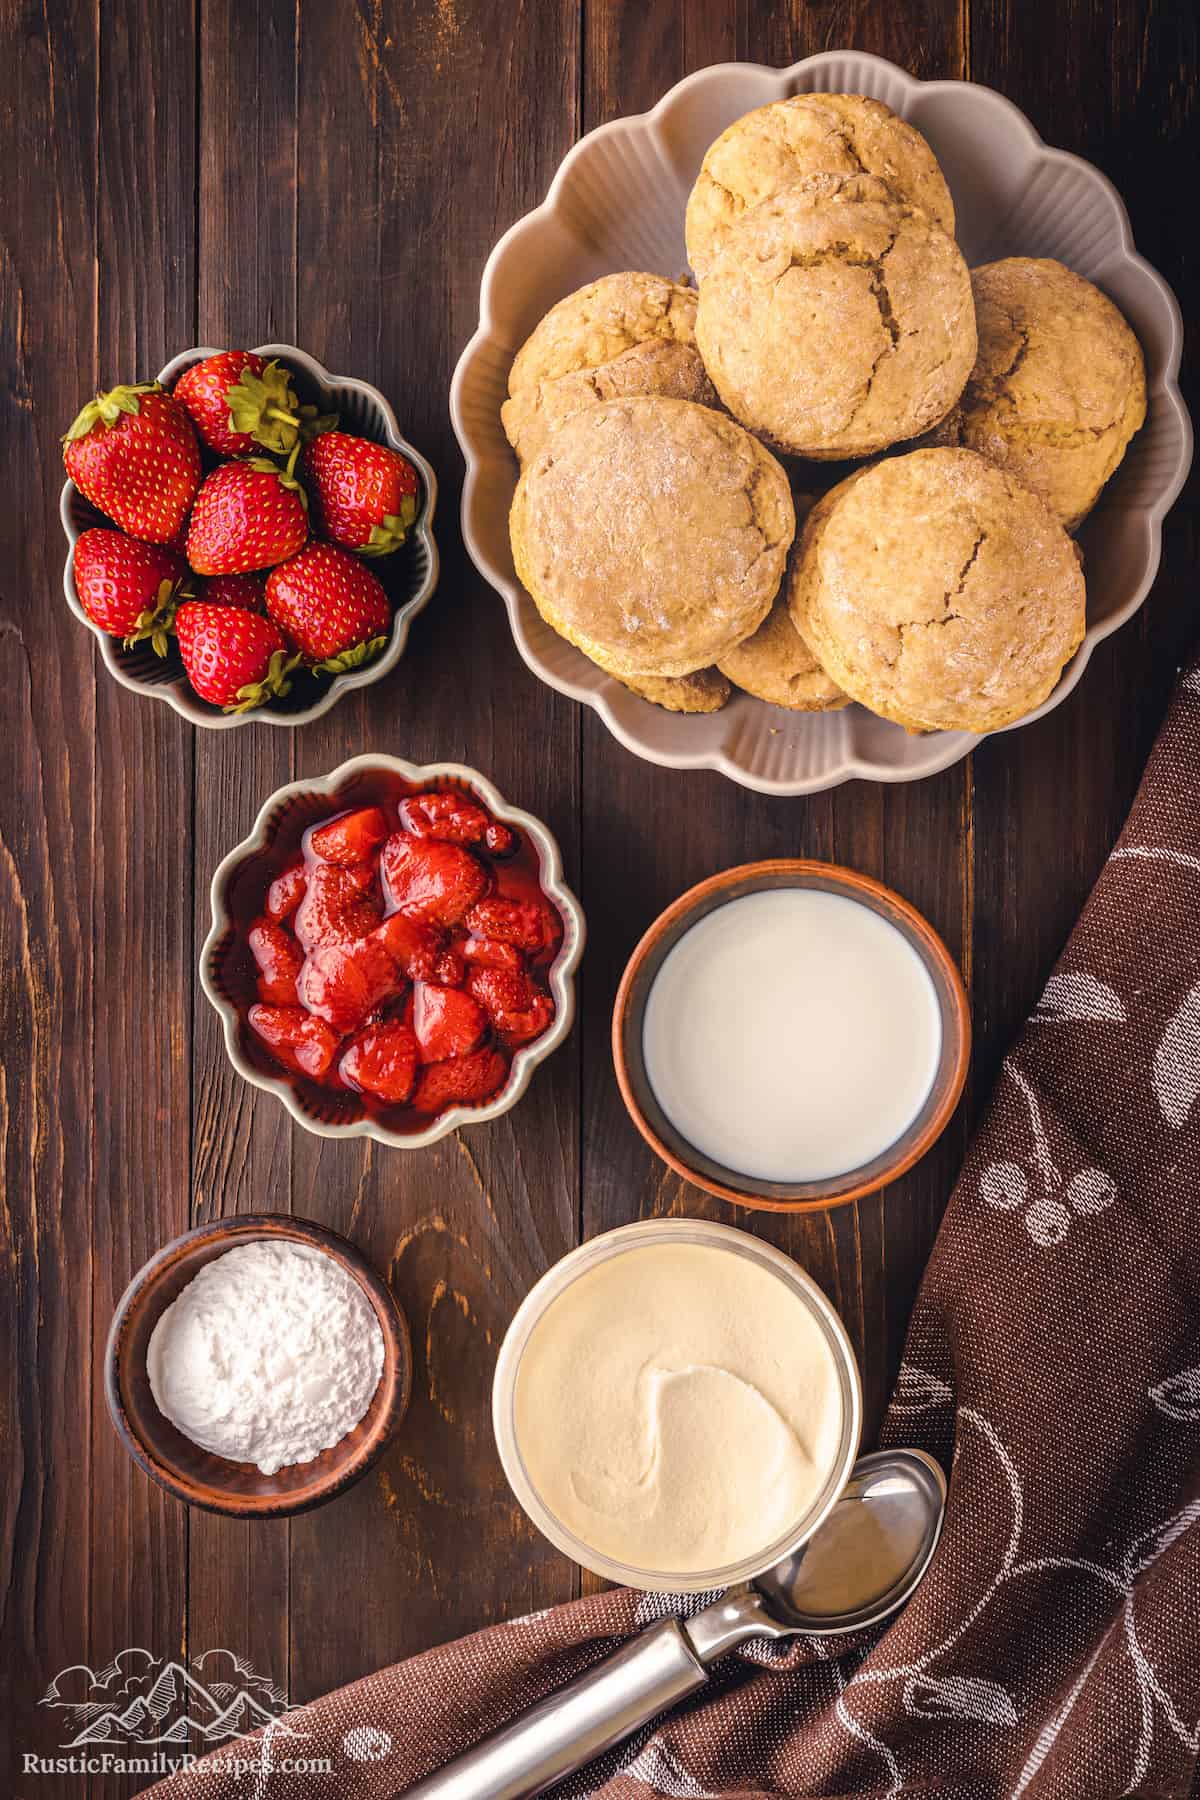 Bowls with shortcakes, strawberries, cream and strawberry sauce.